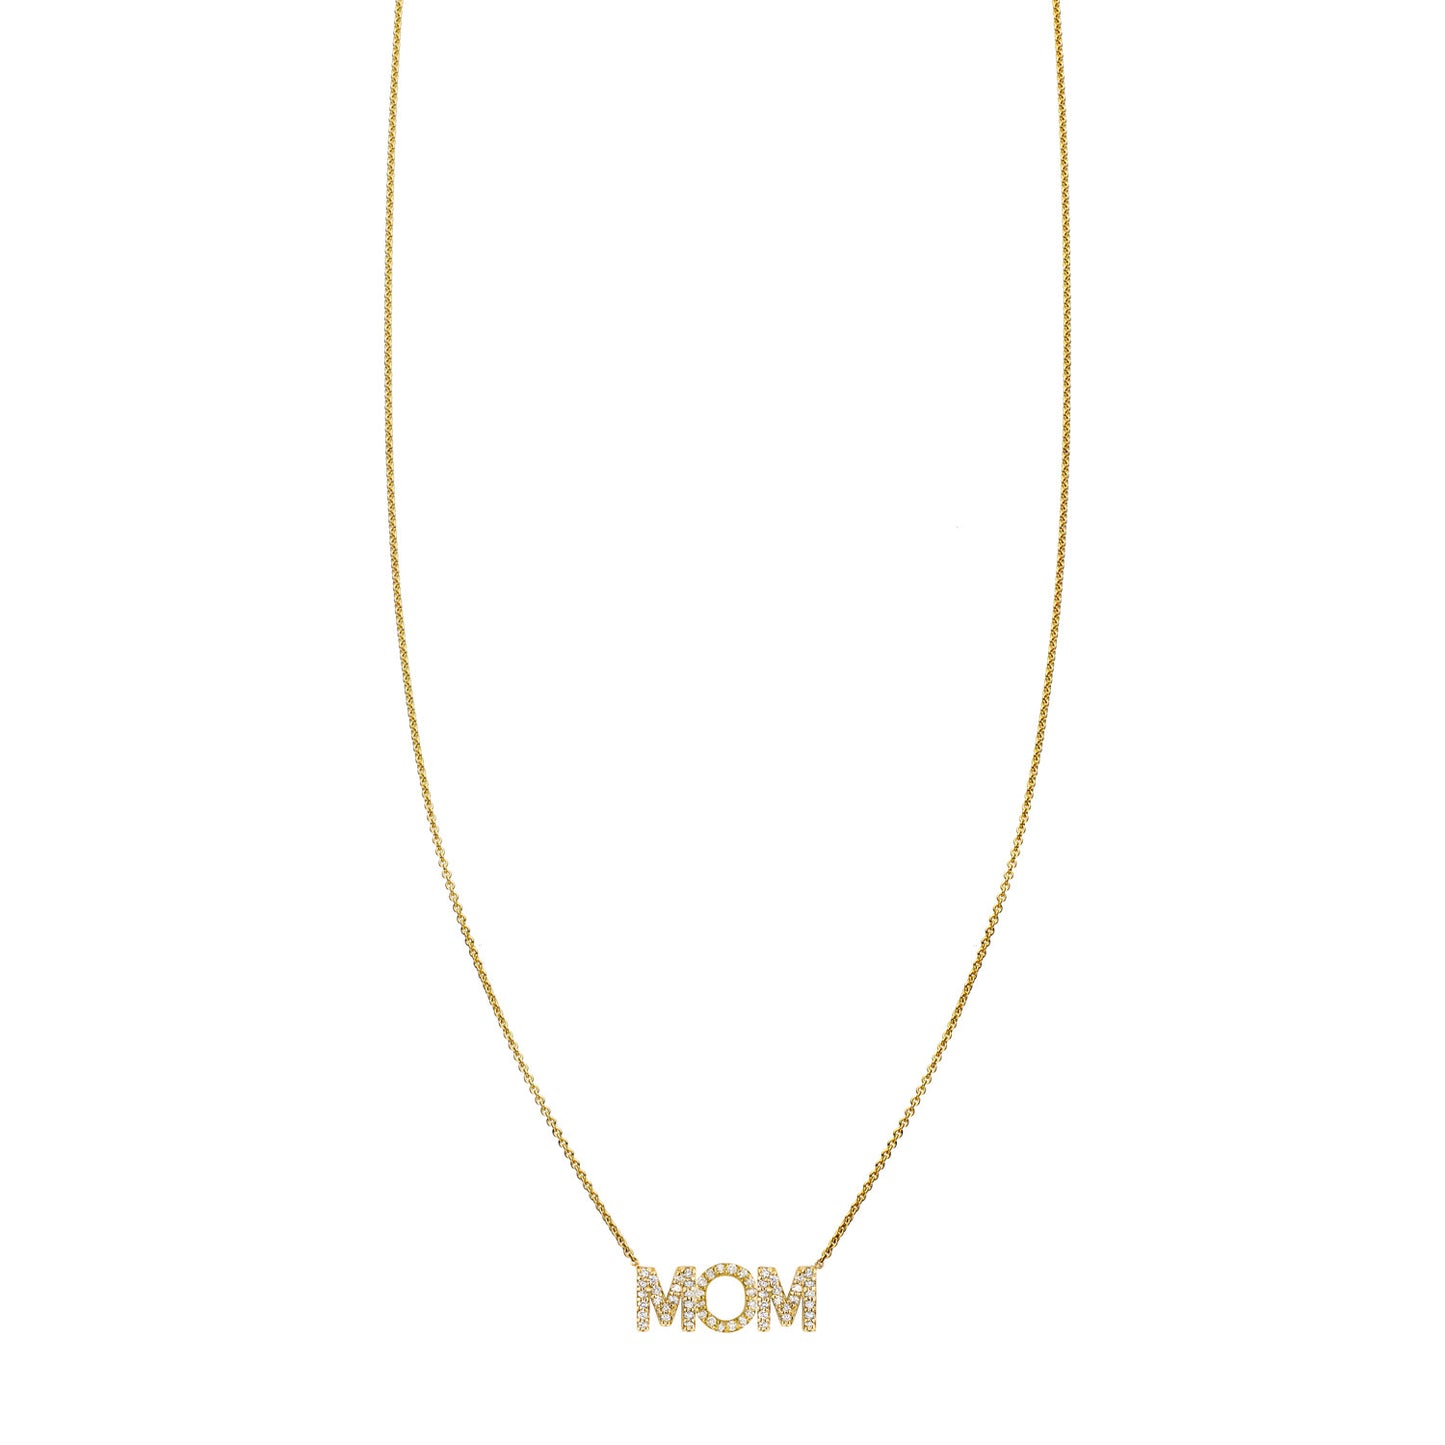 pave_mom_spelling_word_charm_necklace_PRN 401